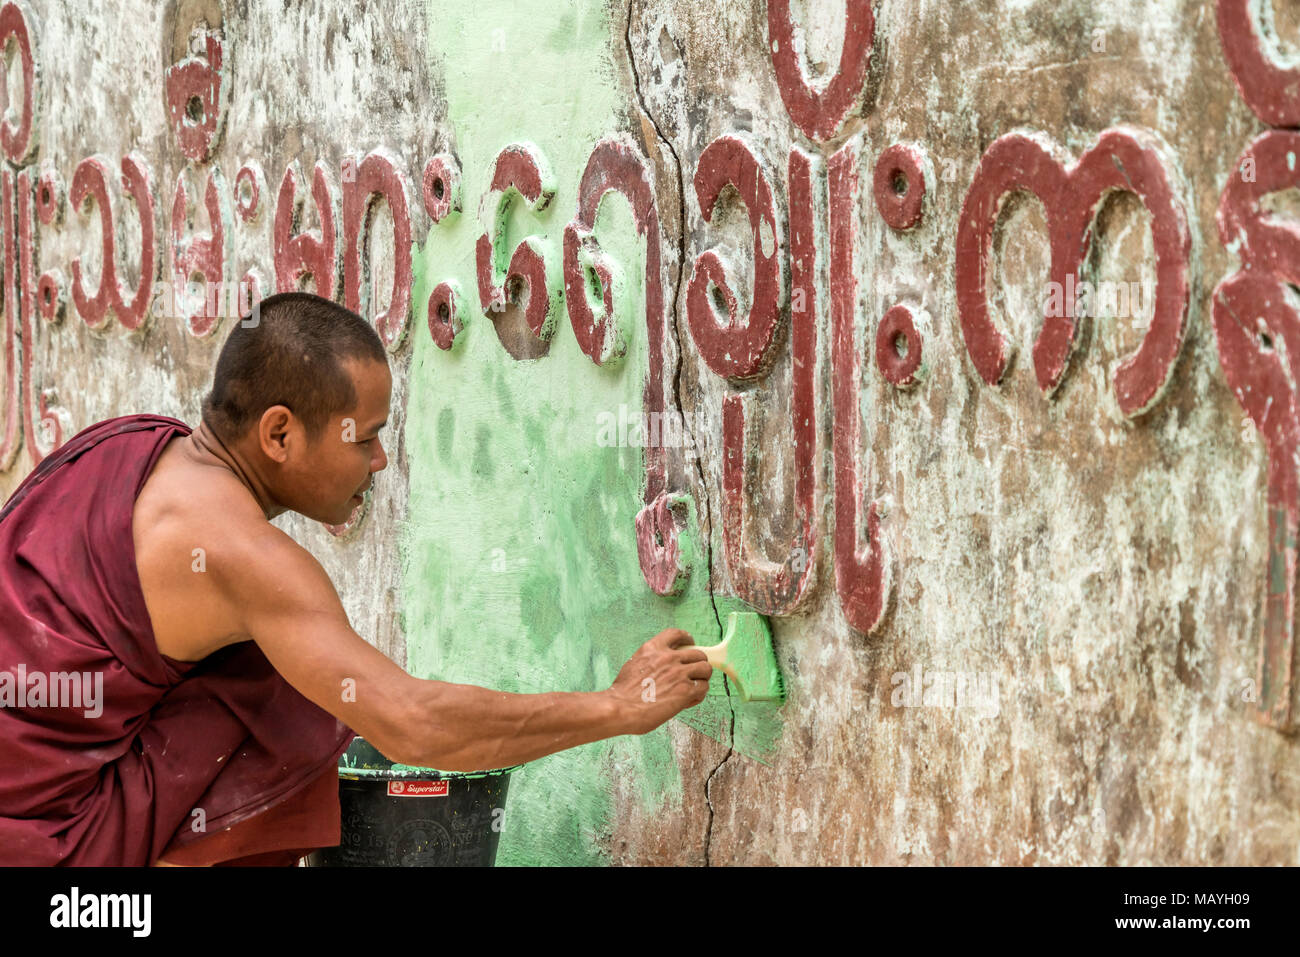 Junge Mönche beim Anstreichen einer Mauer, Hpa-an, Myanmar, Asien  | young monks painting a wall, Hpa-an, Myanmar, Asia Stock Photo